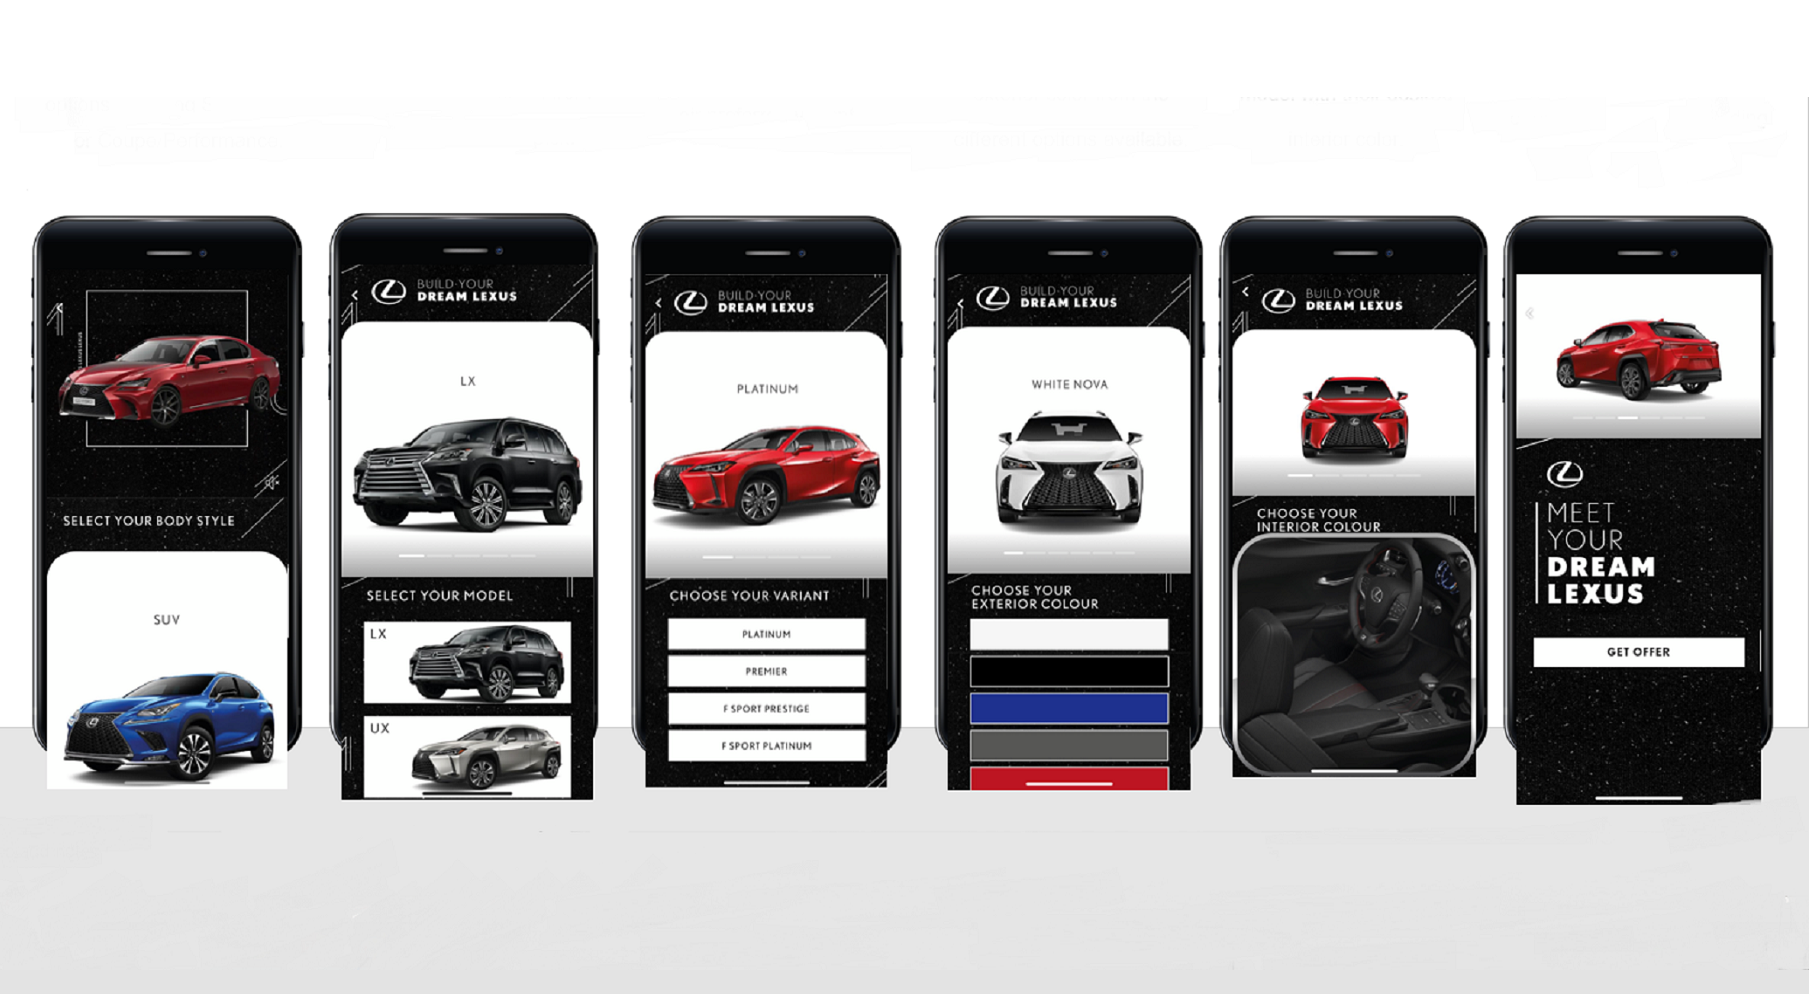 How Memac Ogilvy and Lexus Built a Seamless Online Car-Buying Experience with Facebook